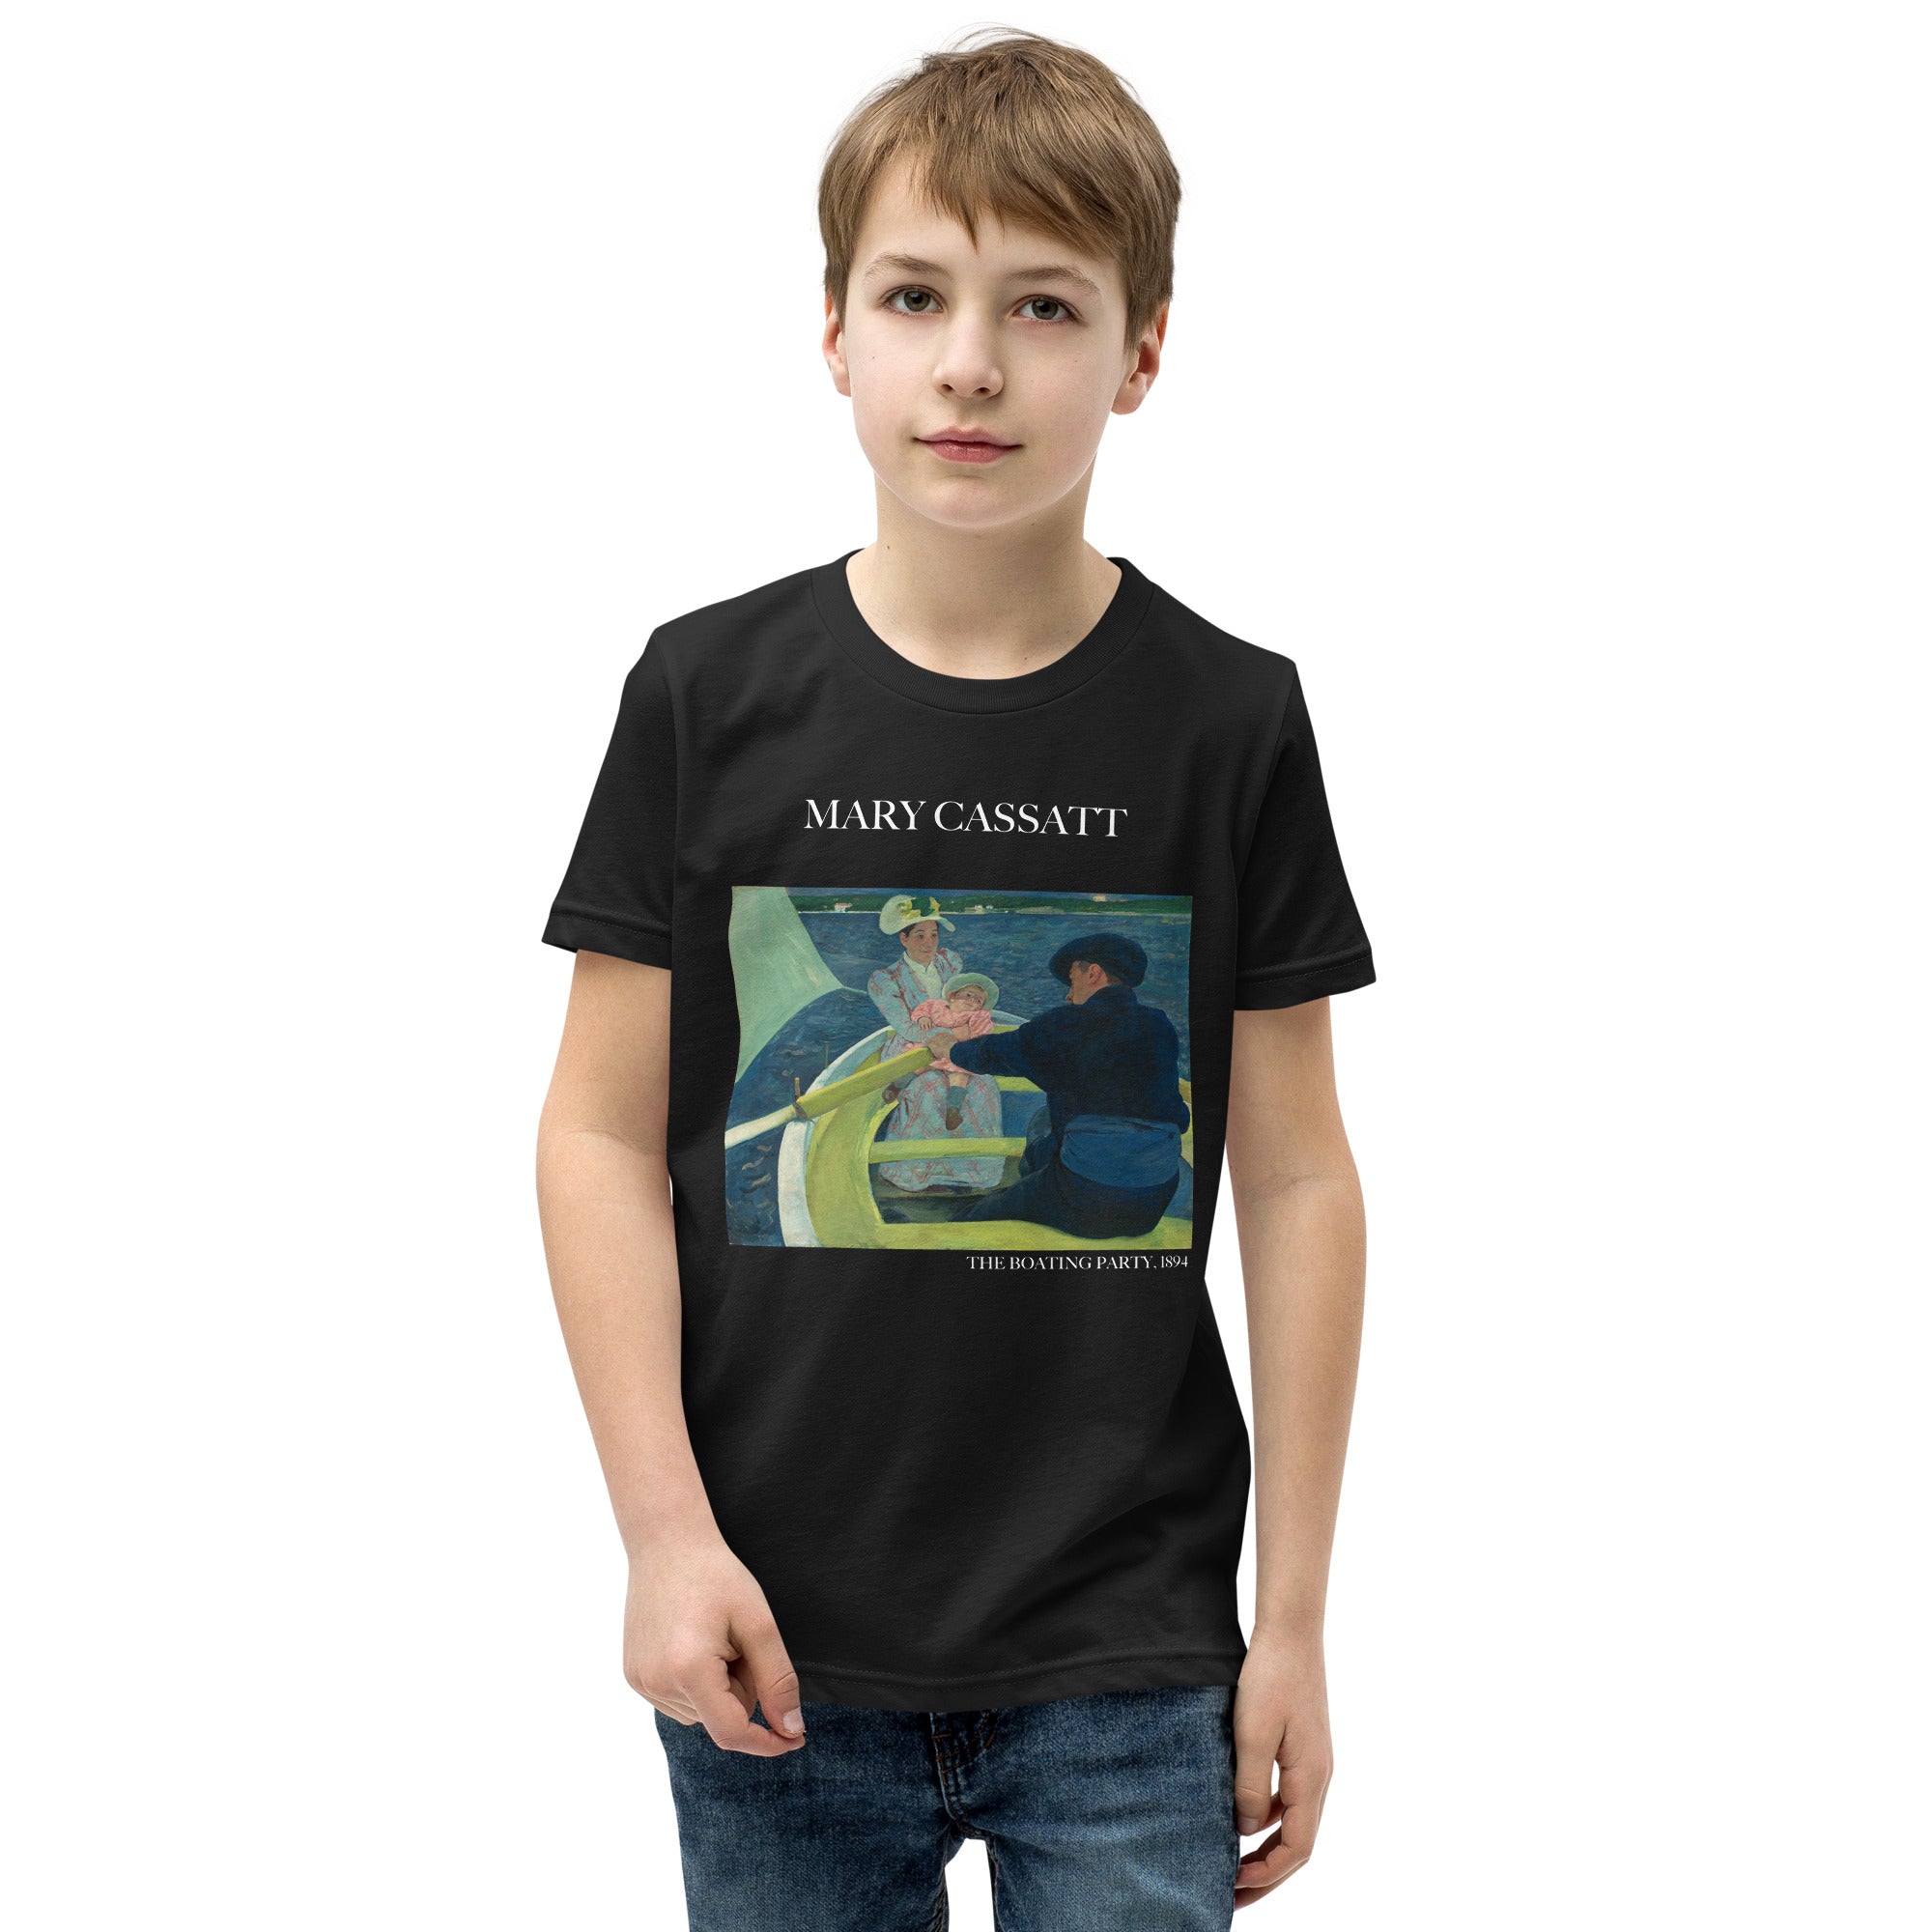 Mary Cassatt 'The Boating Party' Famous Painting Short Sleeve T-Shirt | Premium Youth Art Tee